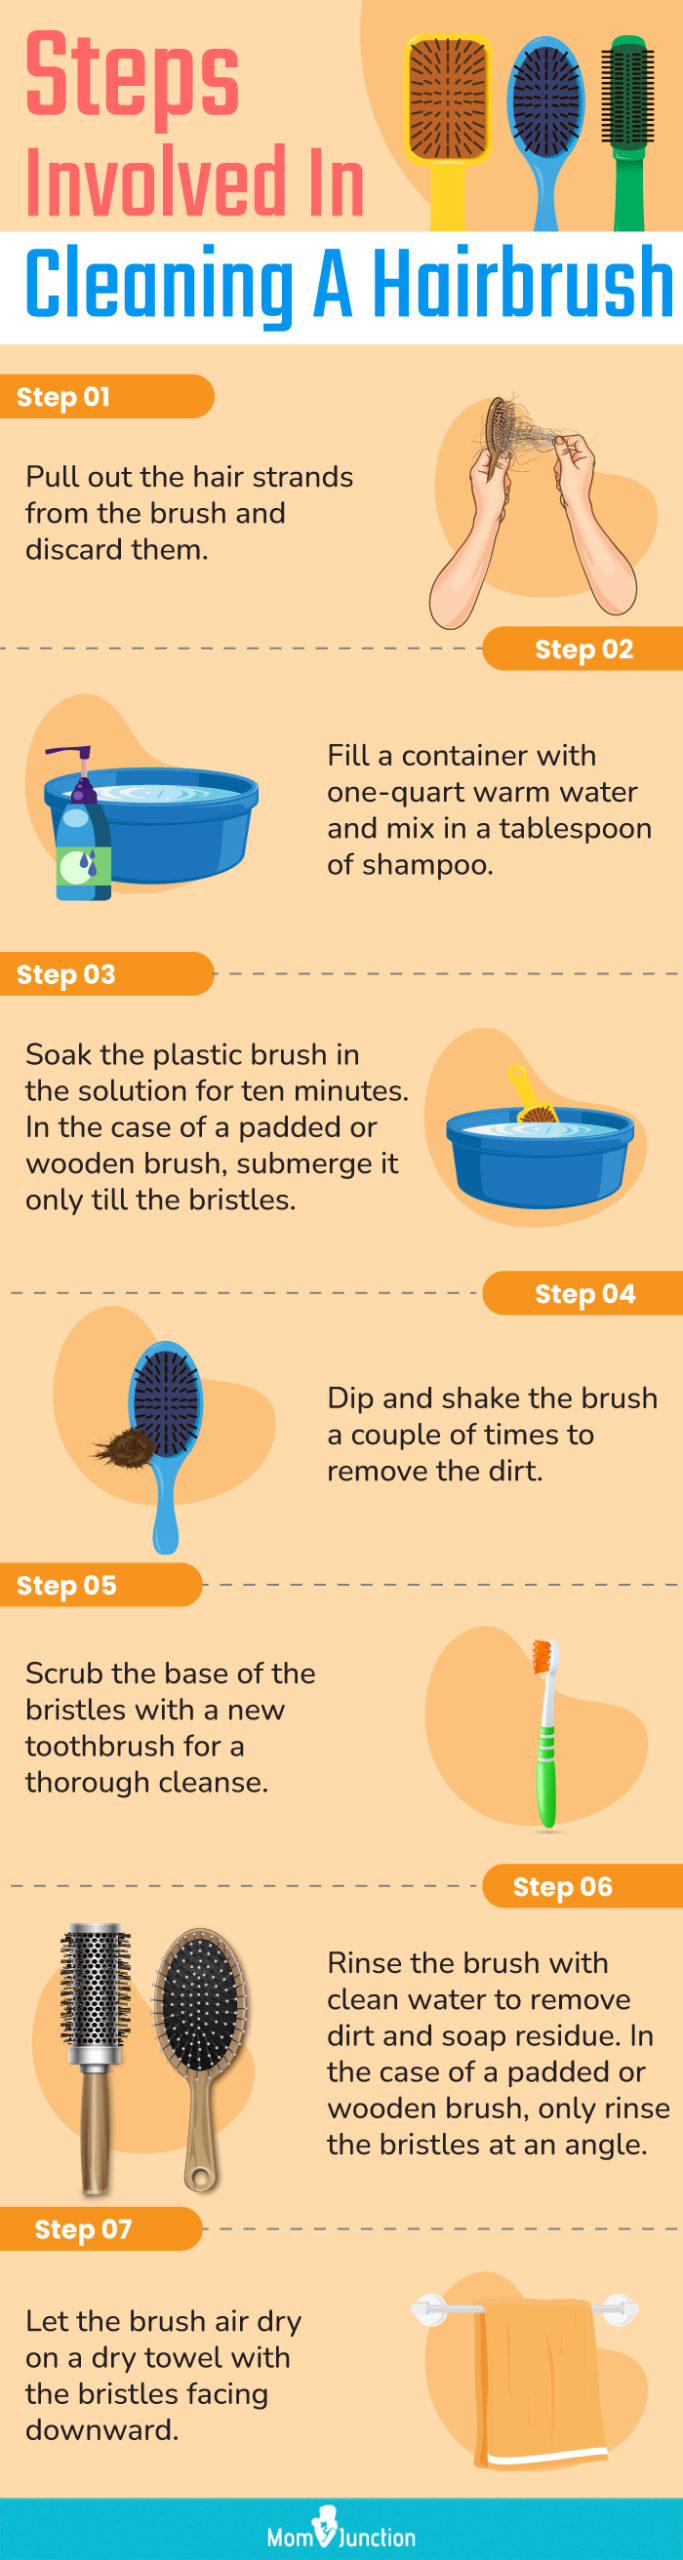 Steps Involved In Cleaning A Hairbrush (infographic)